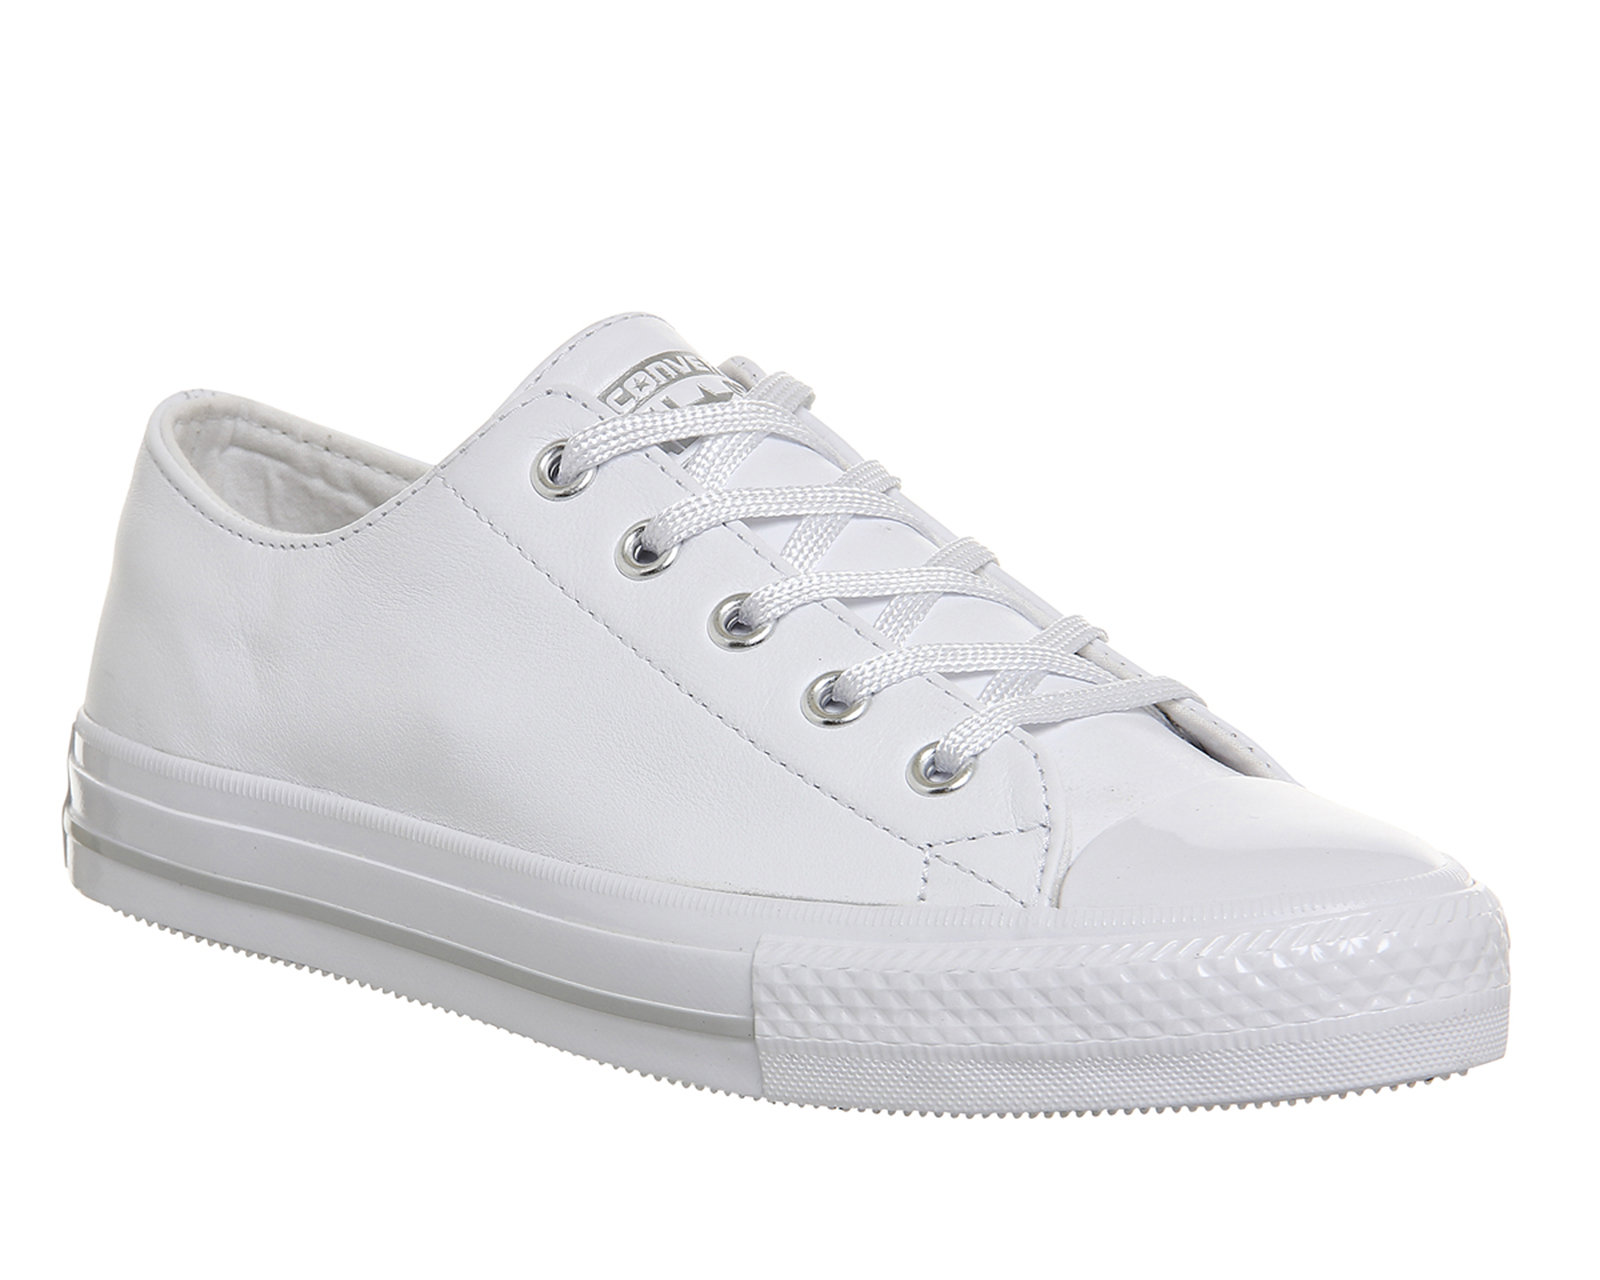 Converse Ctas Gemma Low Leather White Mouse - Hers trainers